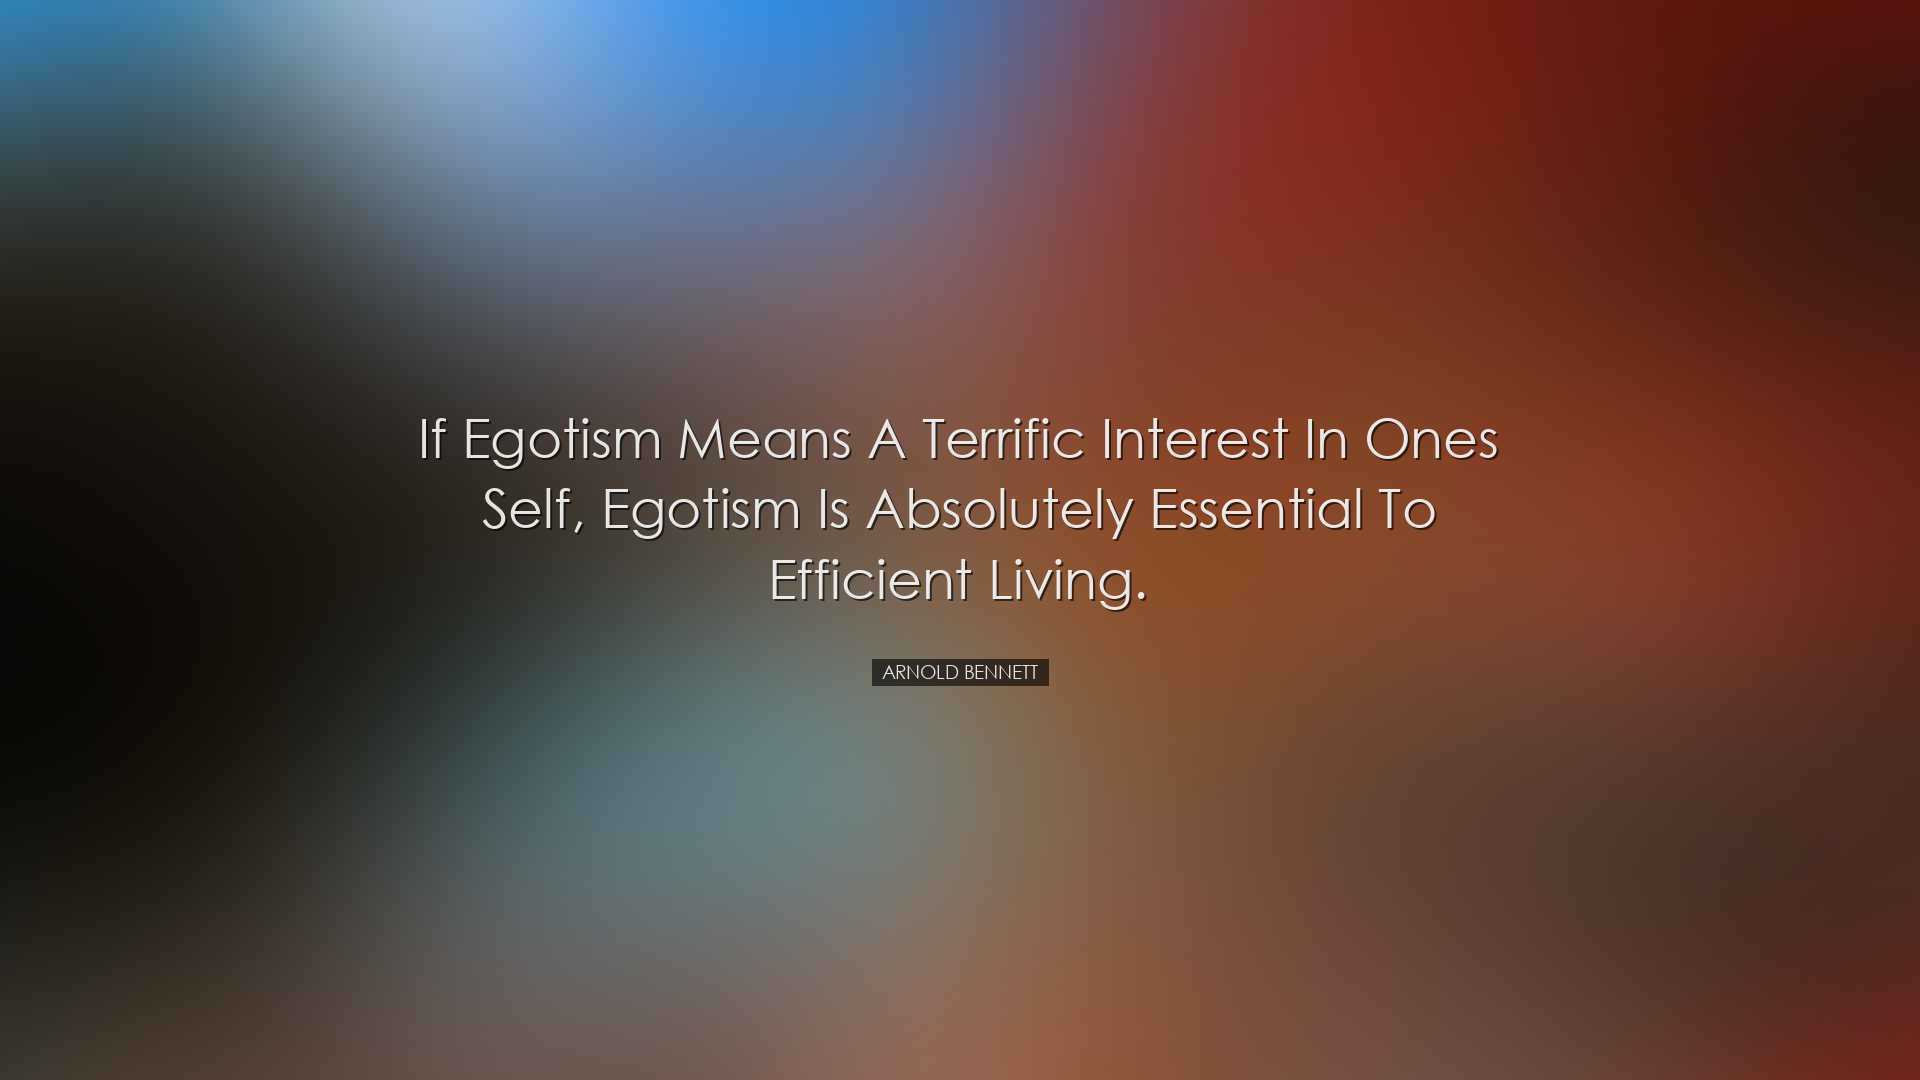 If egotism means a terrific interest in ones self, egotism is abso